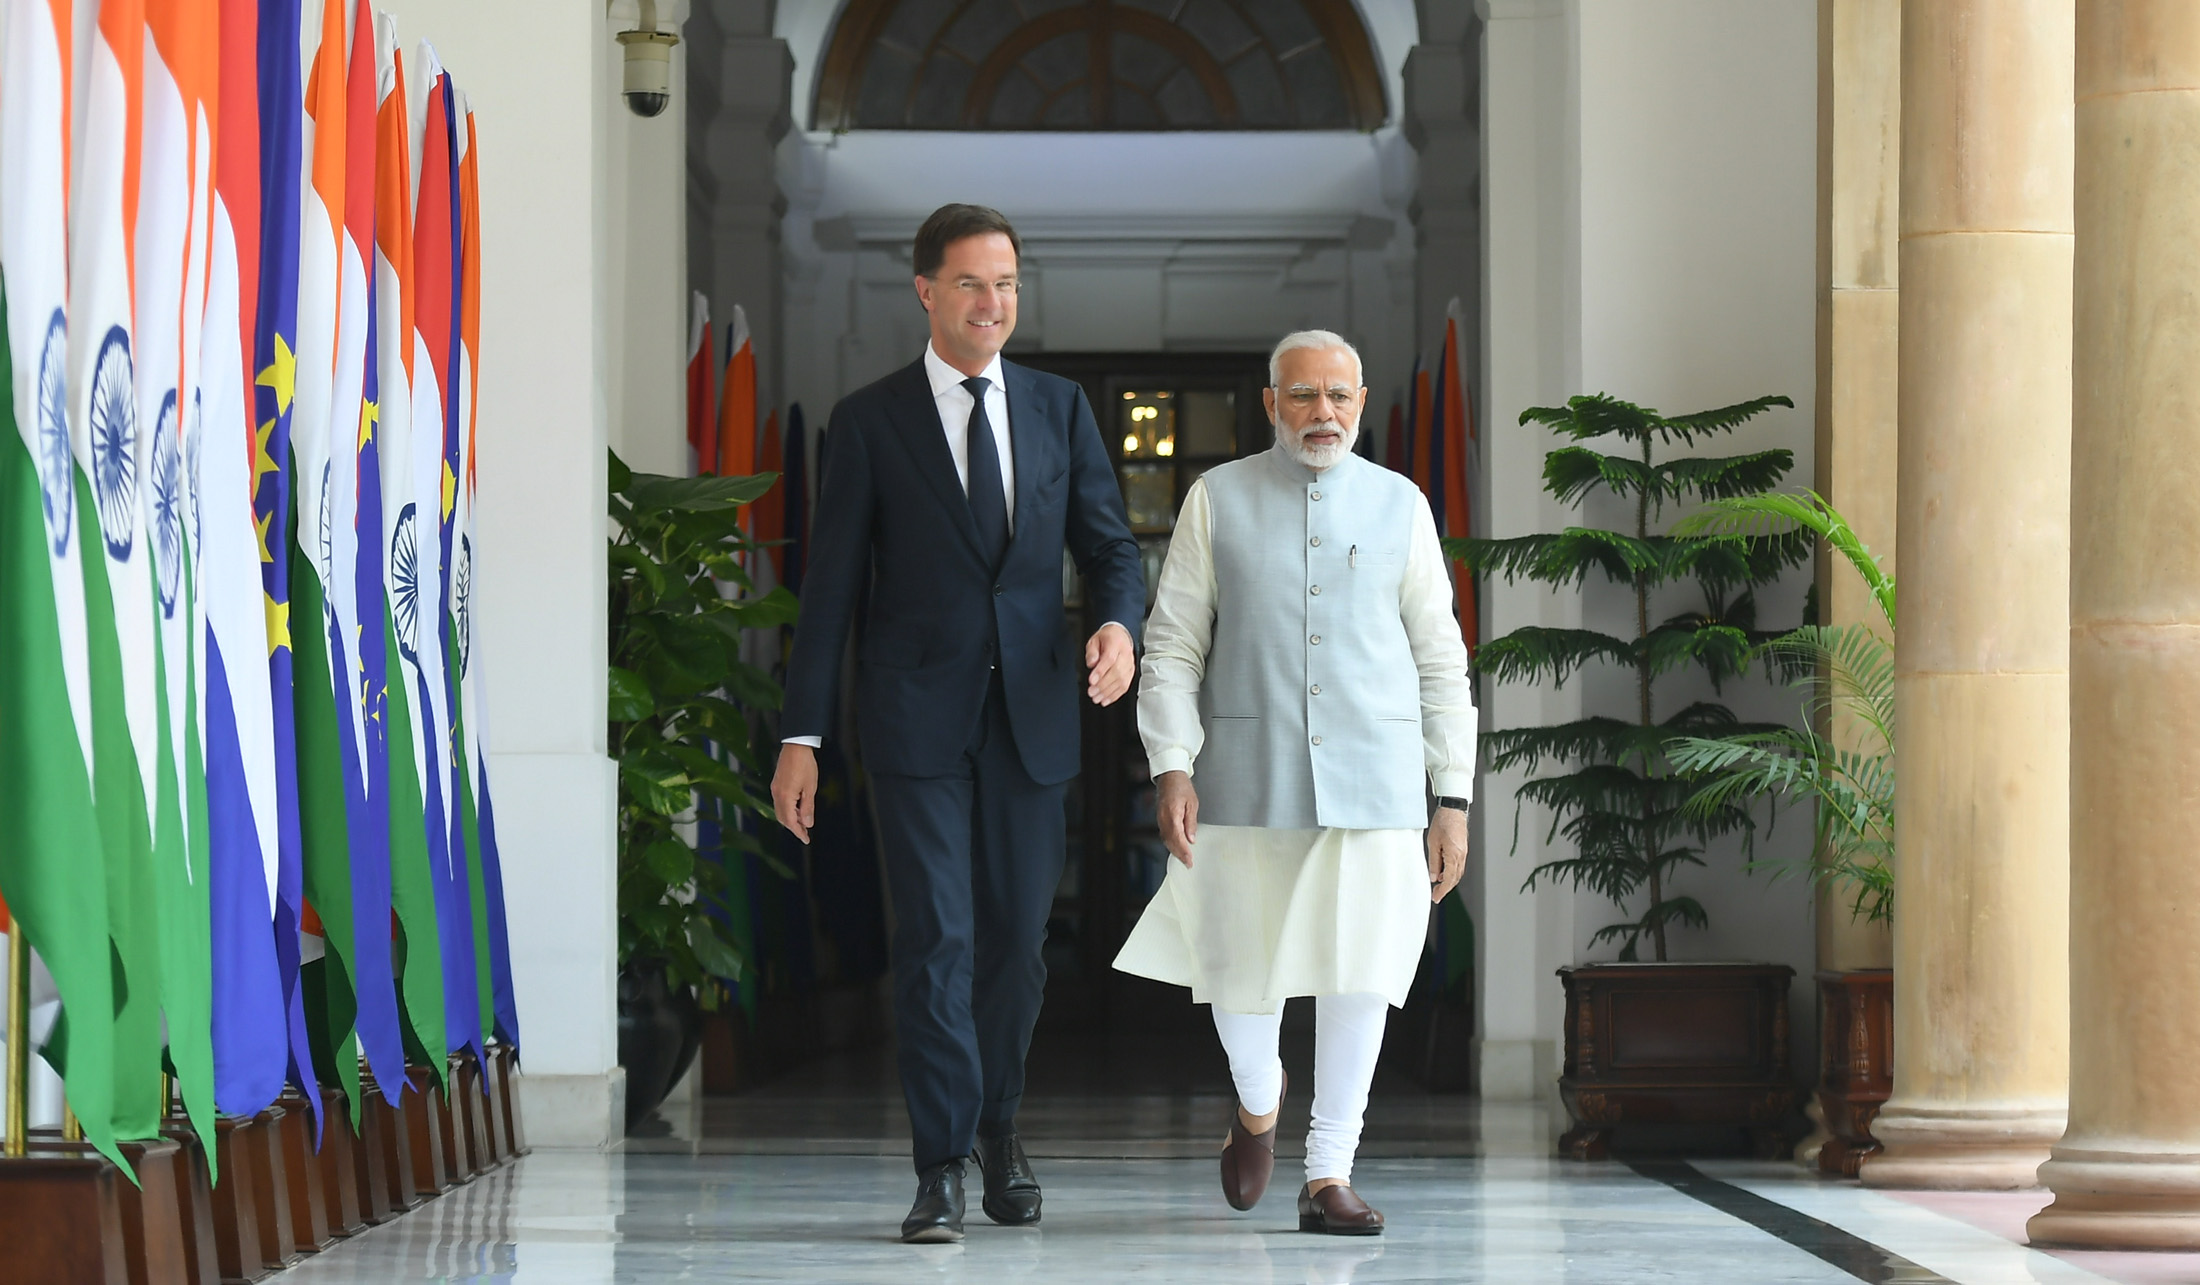 The Prime Minister, Shri Narendra Modi with the Prime Minister of the Kingdom of Netherlands, Mr. Mark Rutte, at Hyderabad House, in New Delhi on May 24, 2018.